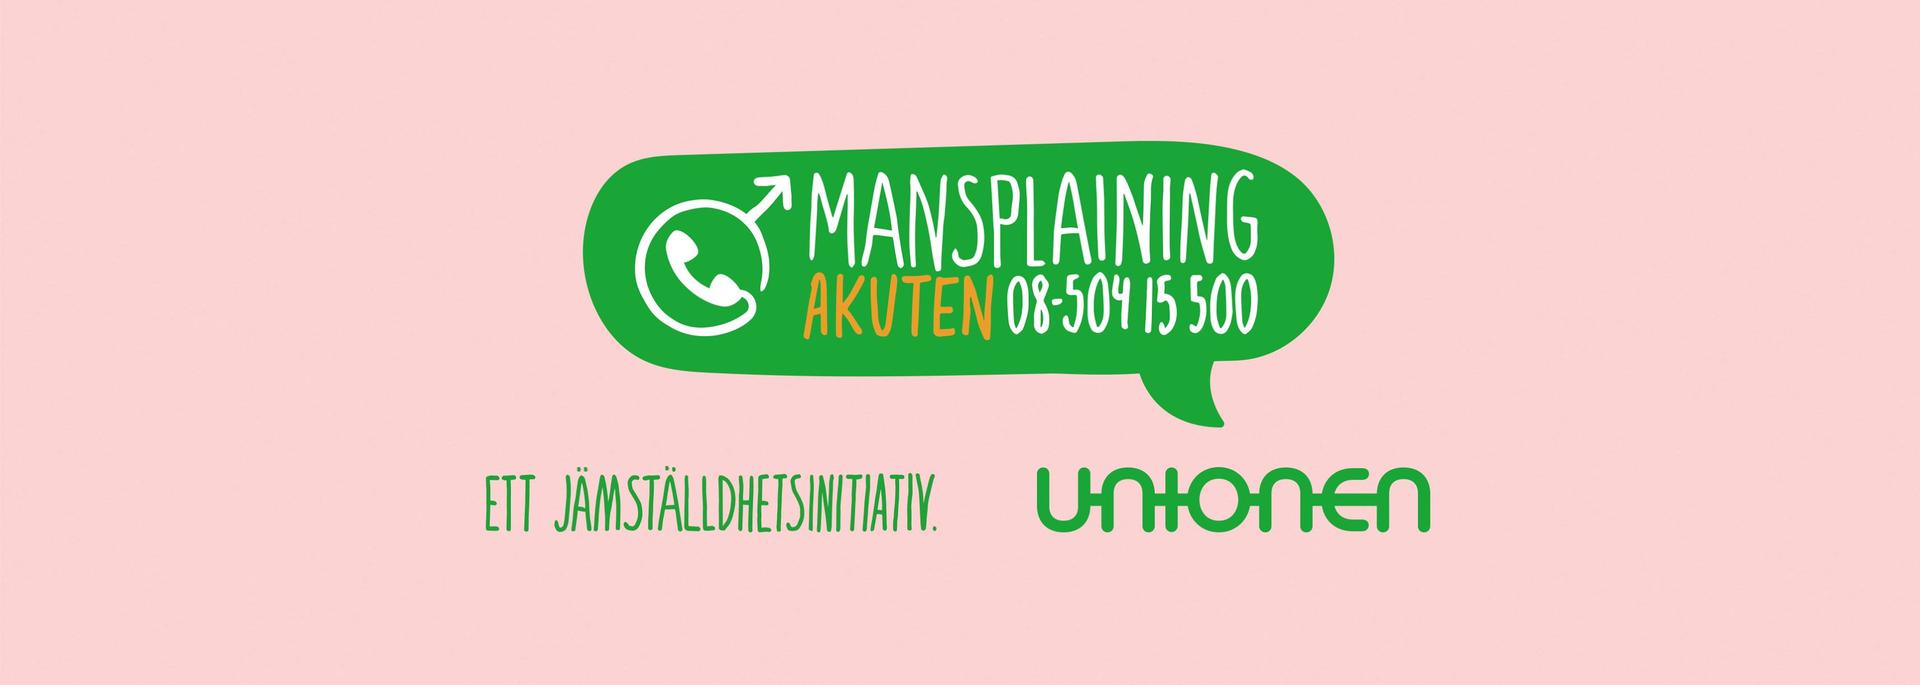 Sweden's largest trade union, Unionen, is sponsoring the mansplaining hotline, which will be open for one week.